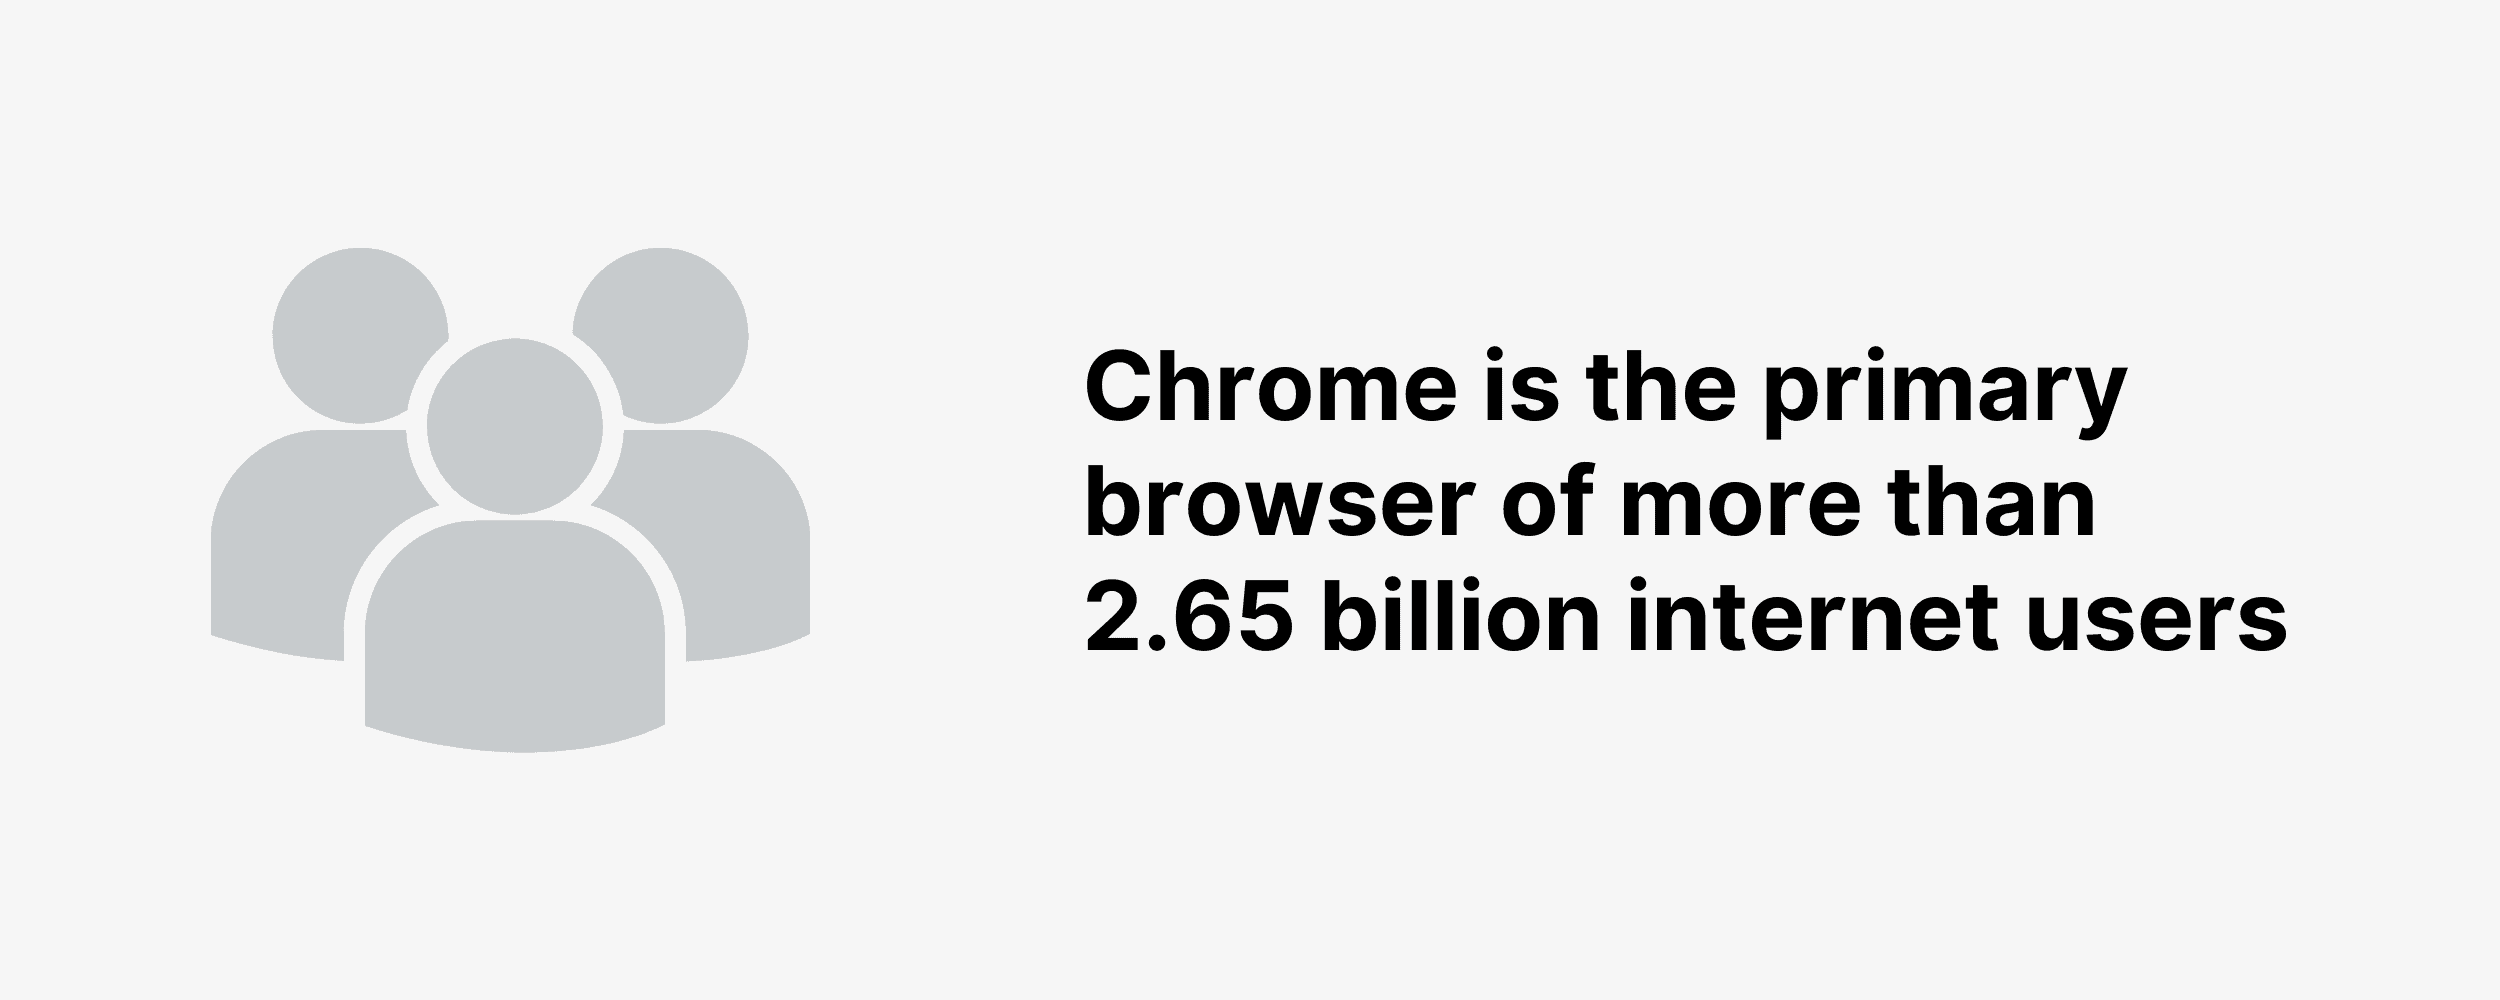 Chrome is the primary browser of more than 2.65 billion internet users